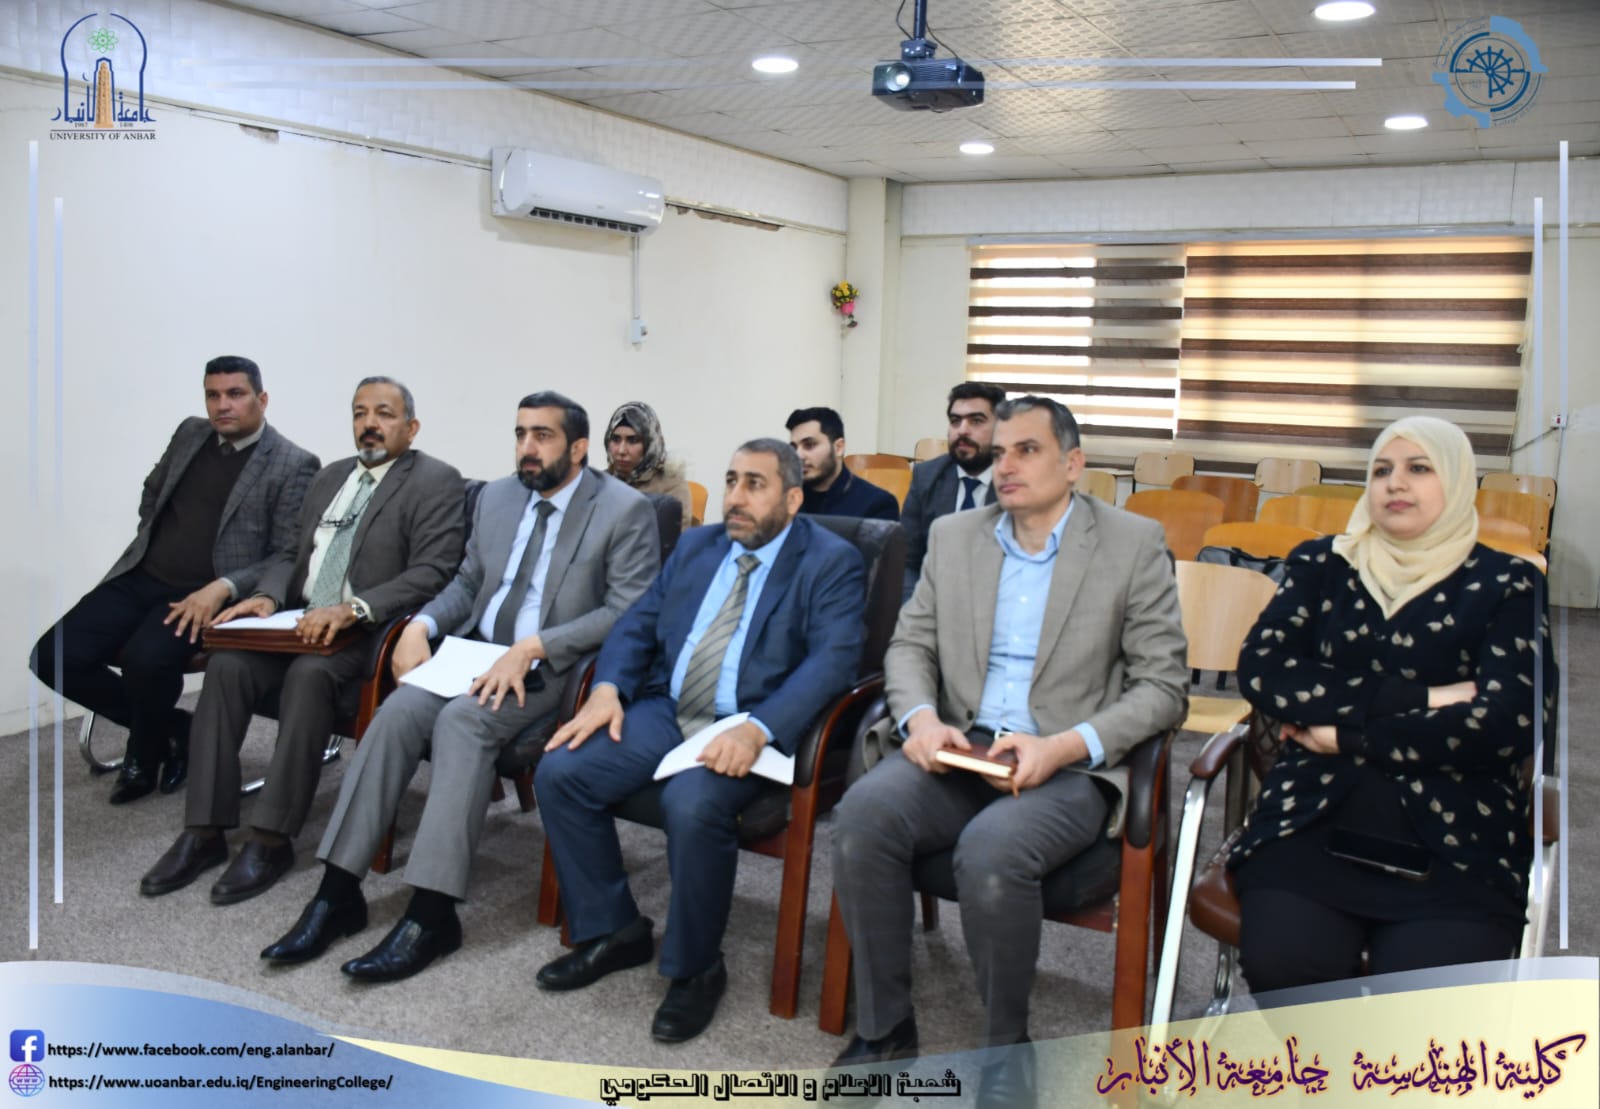 A seminar for graduate students in the Department of Mechanical Engineering